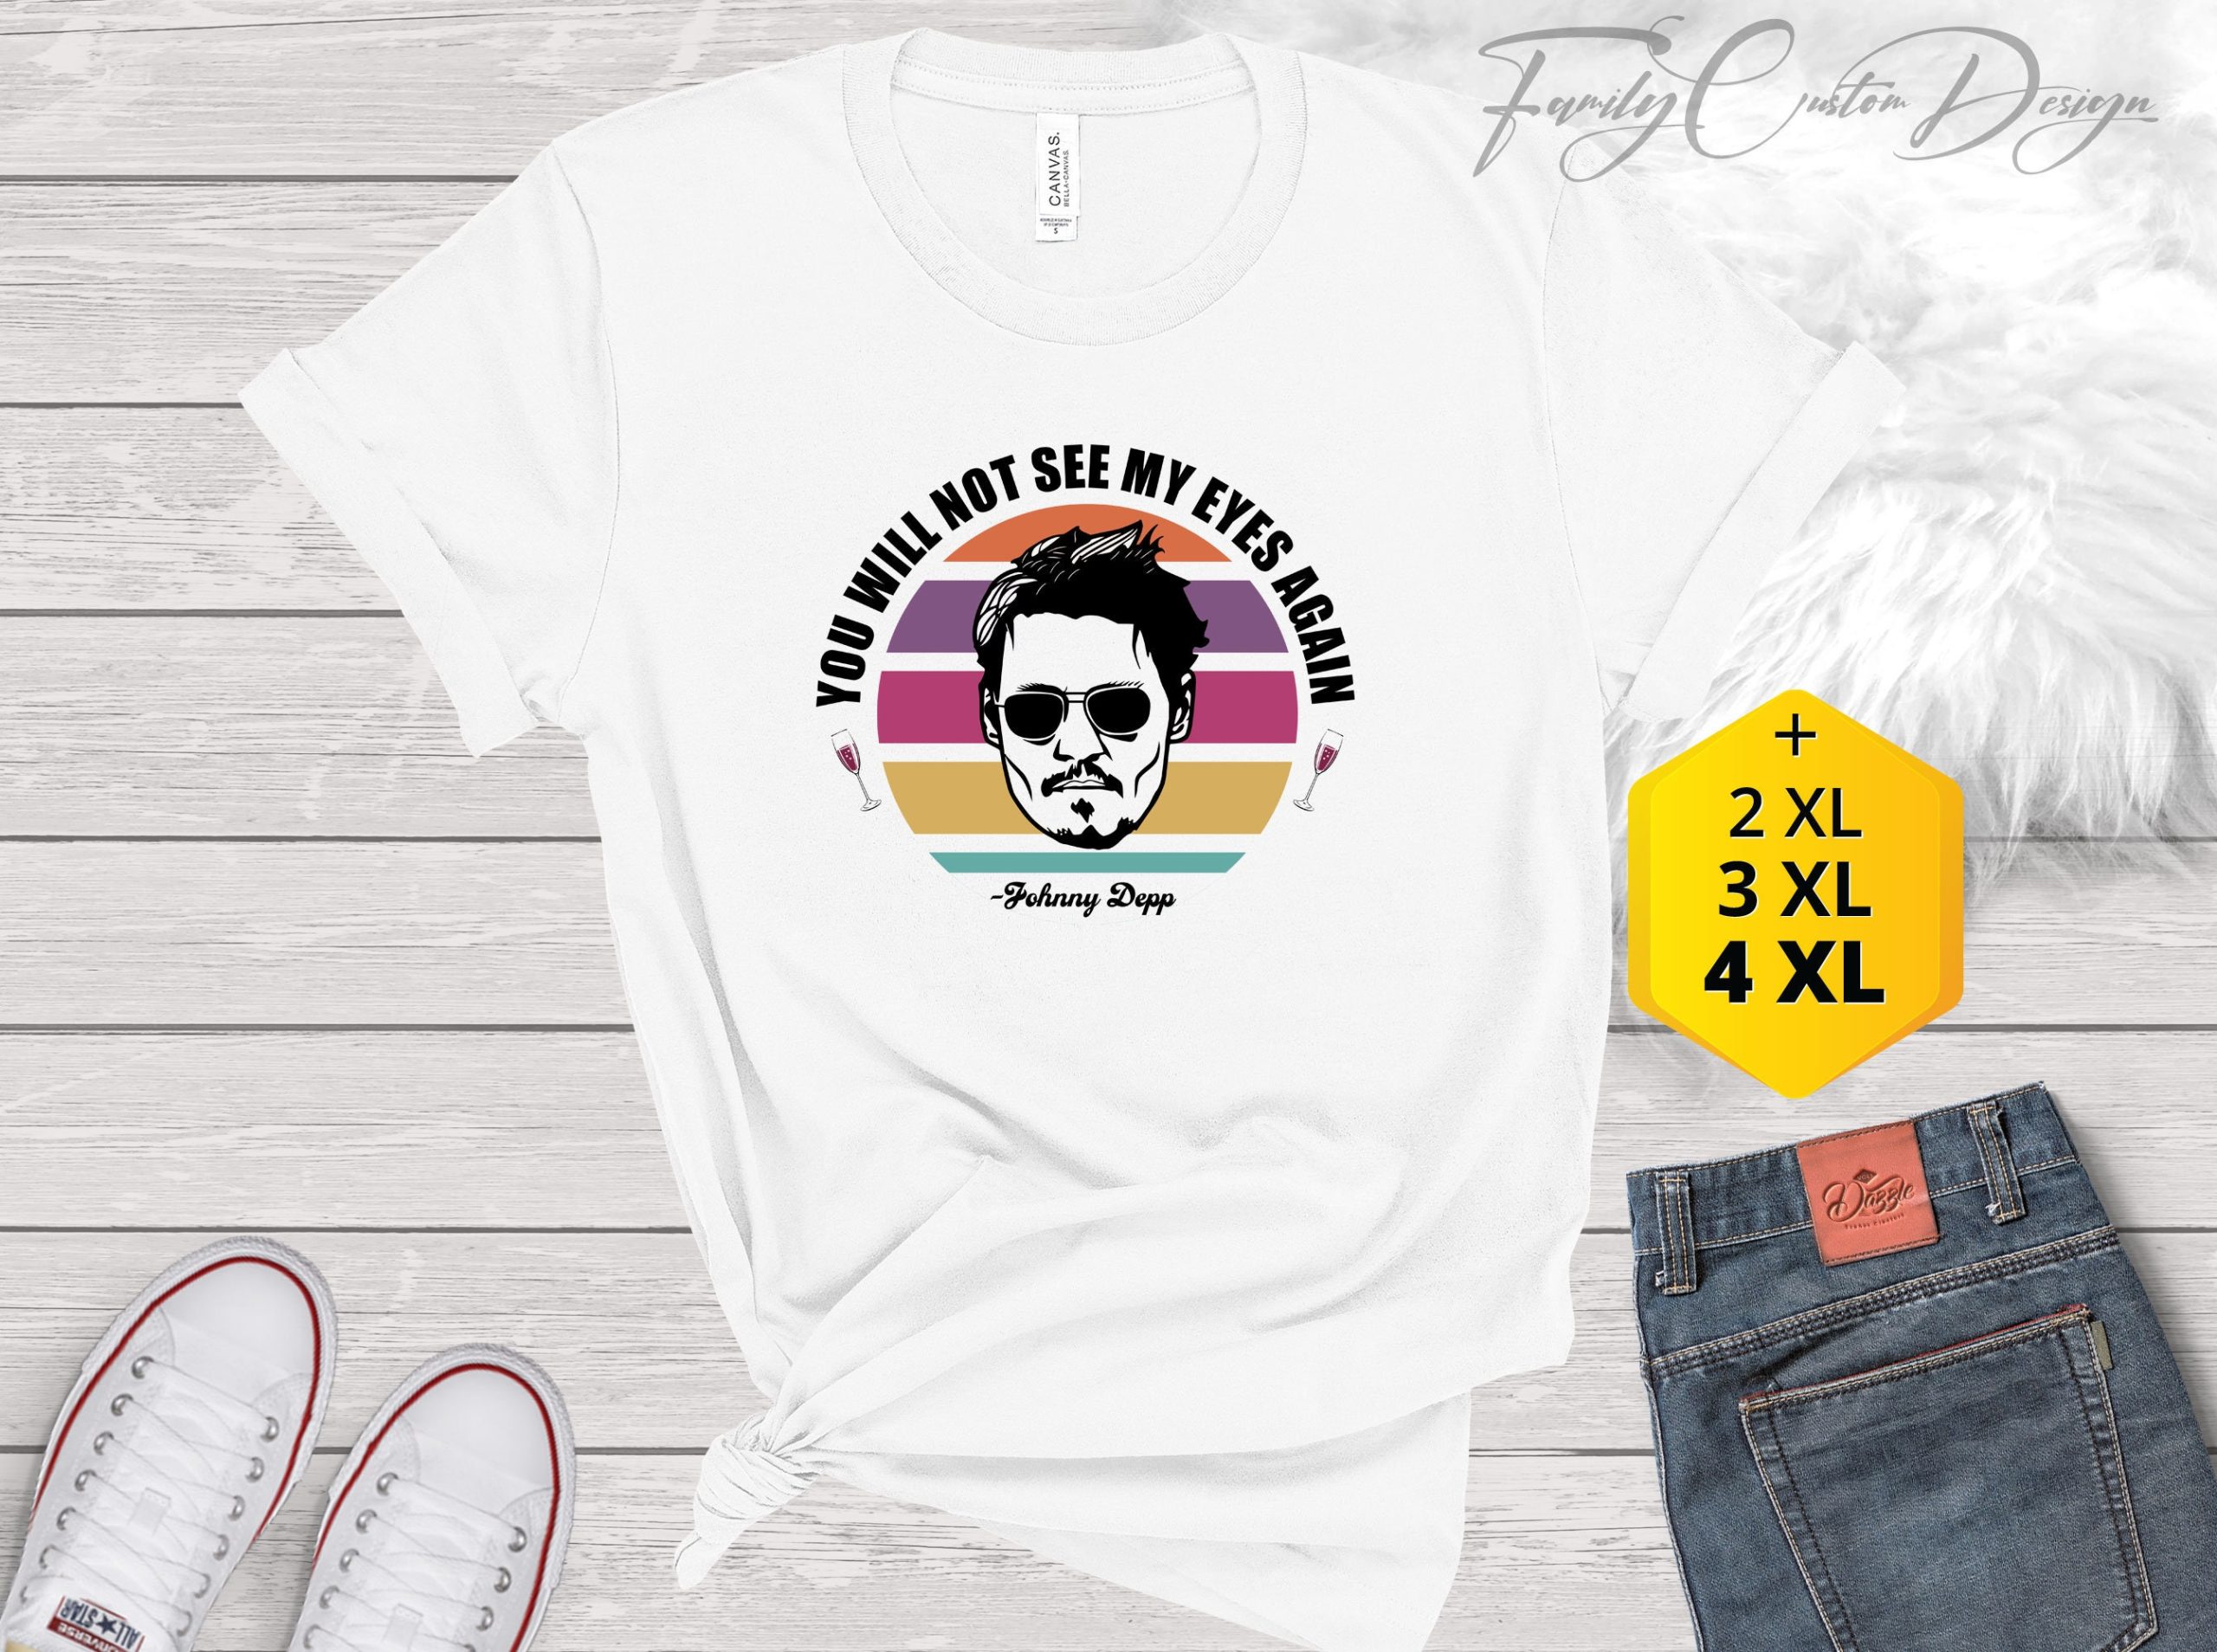 My Dog Stepped On A Bee Amber Heard Johnny Depp Unisex T-Shirt – Teepital –  Everyday New Aesthetic Designs